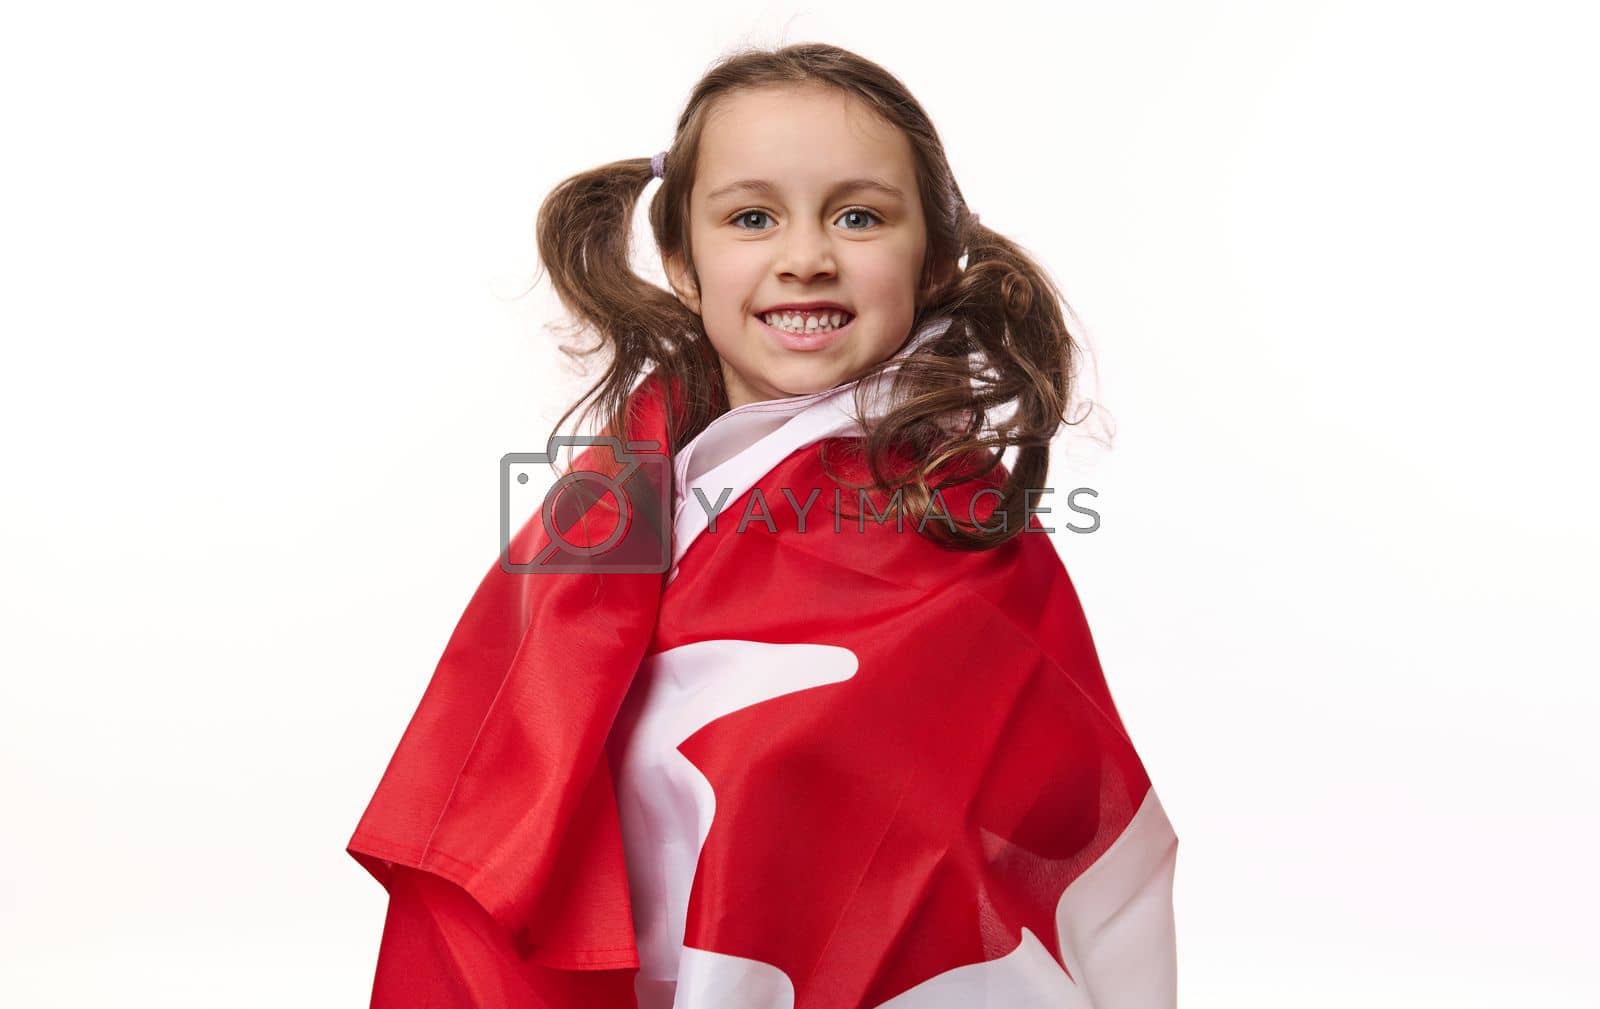 Royalty free image of American lovely little girl wrapping Canada flag, smiling a beautiful toothy smile looking at camera, isolated on white by artgf